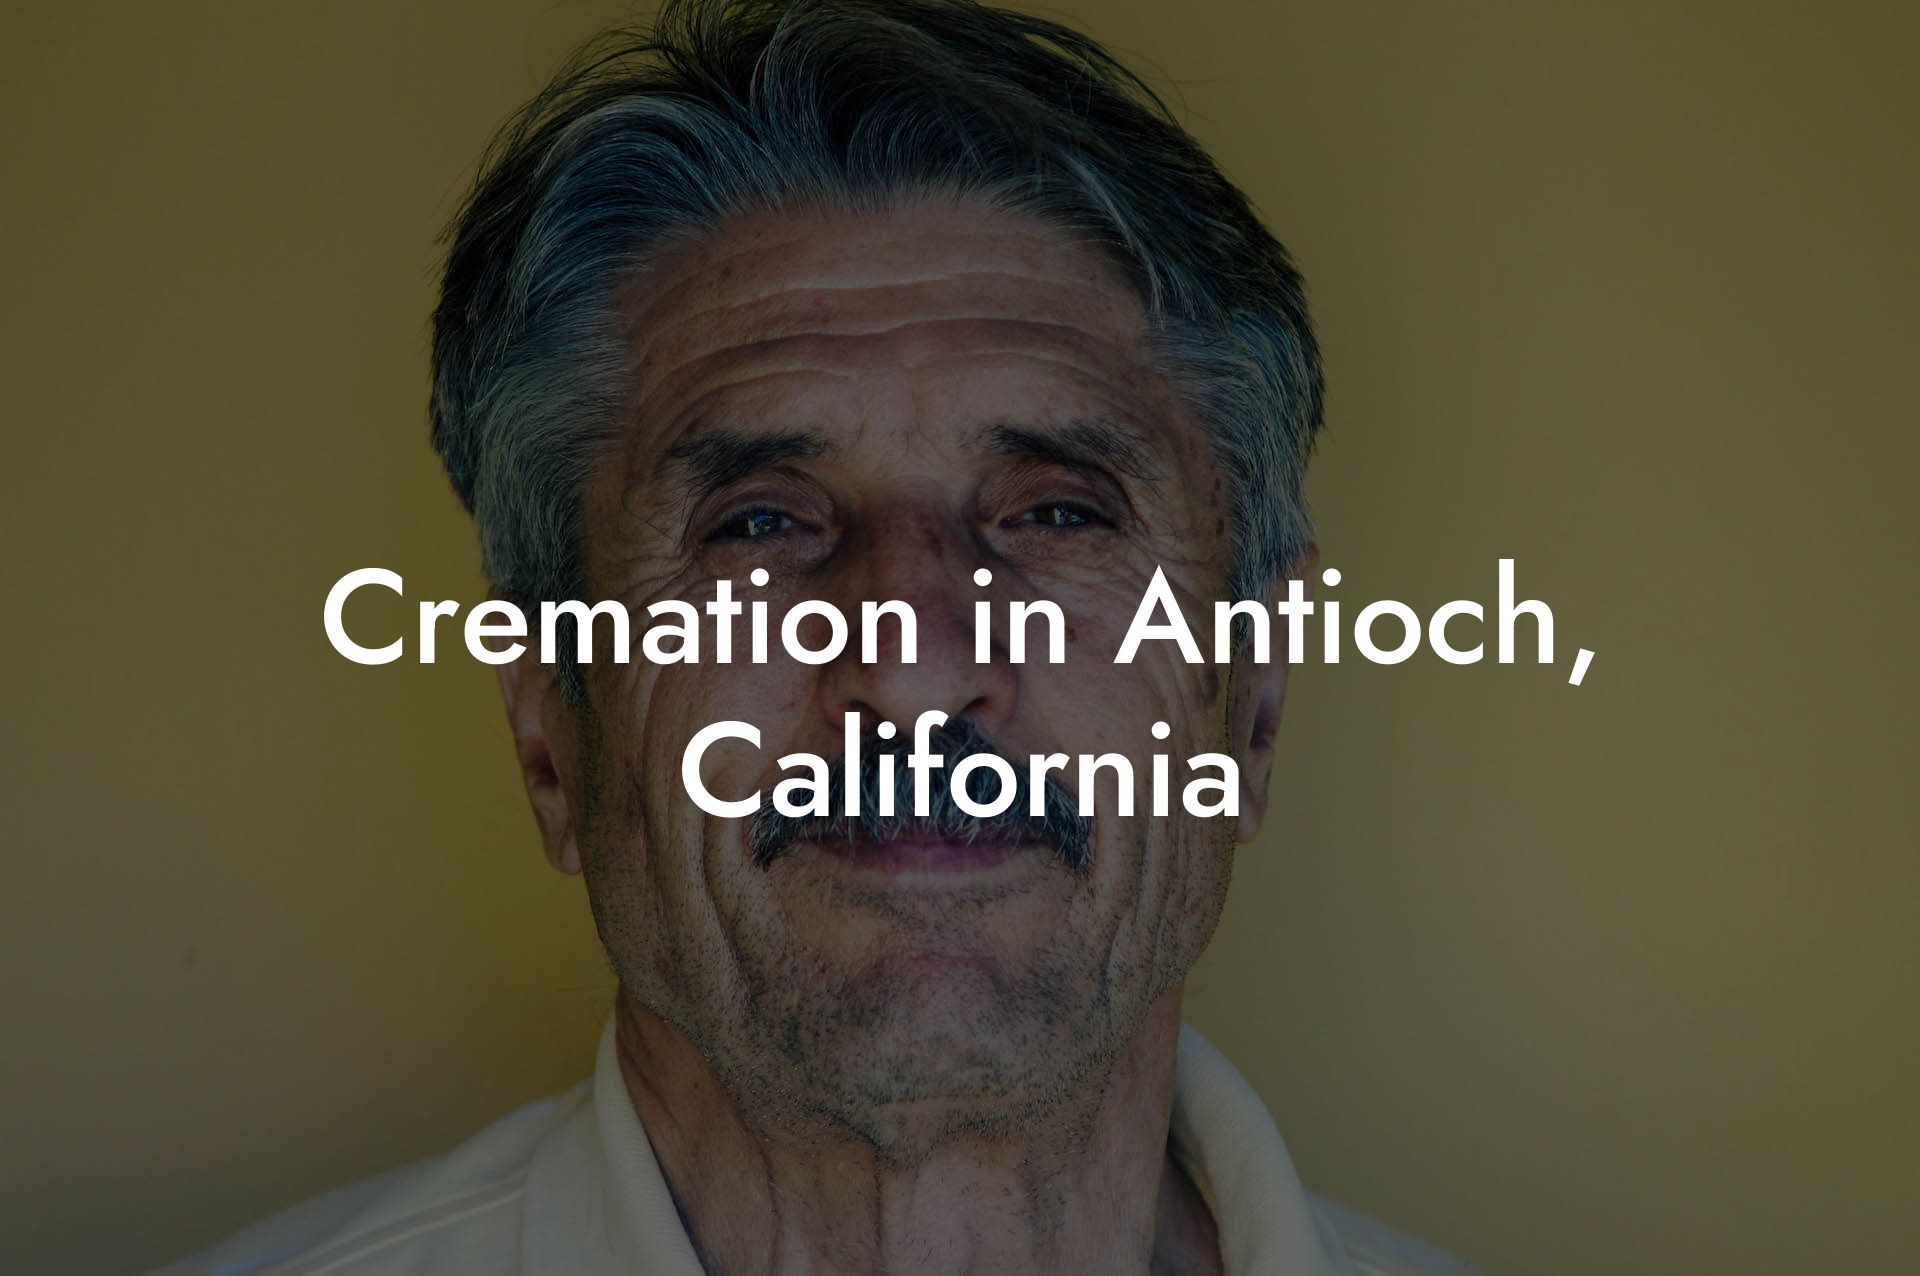 Cremation in Antioch, California